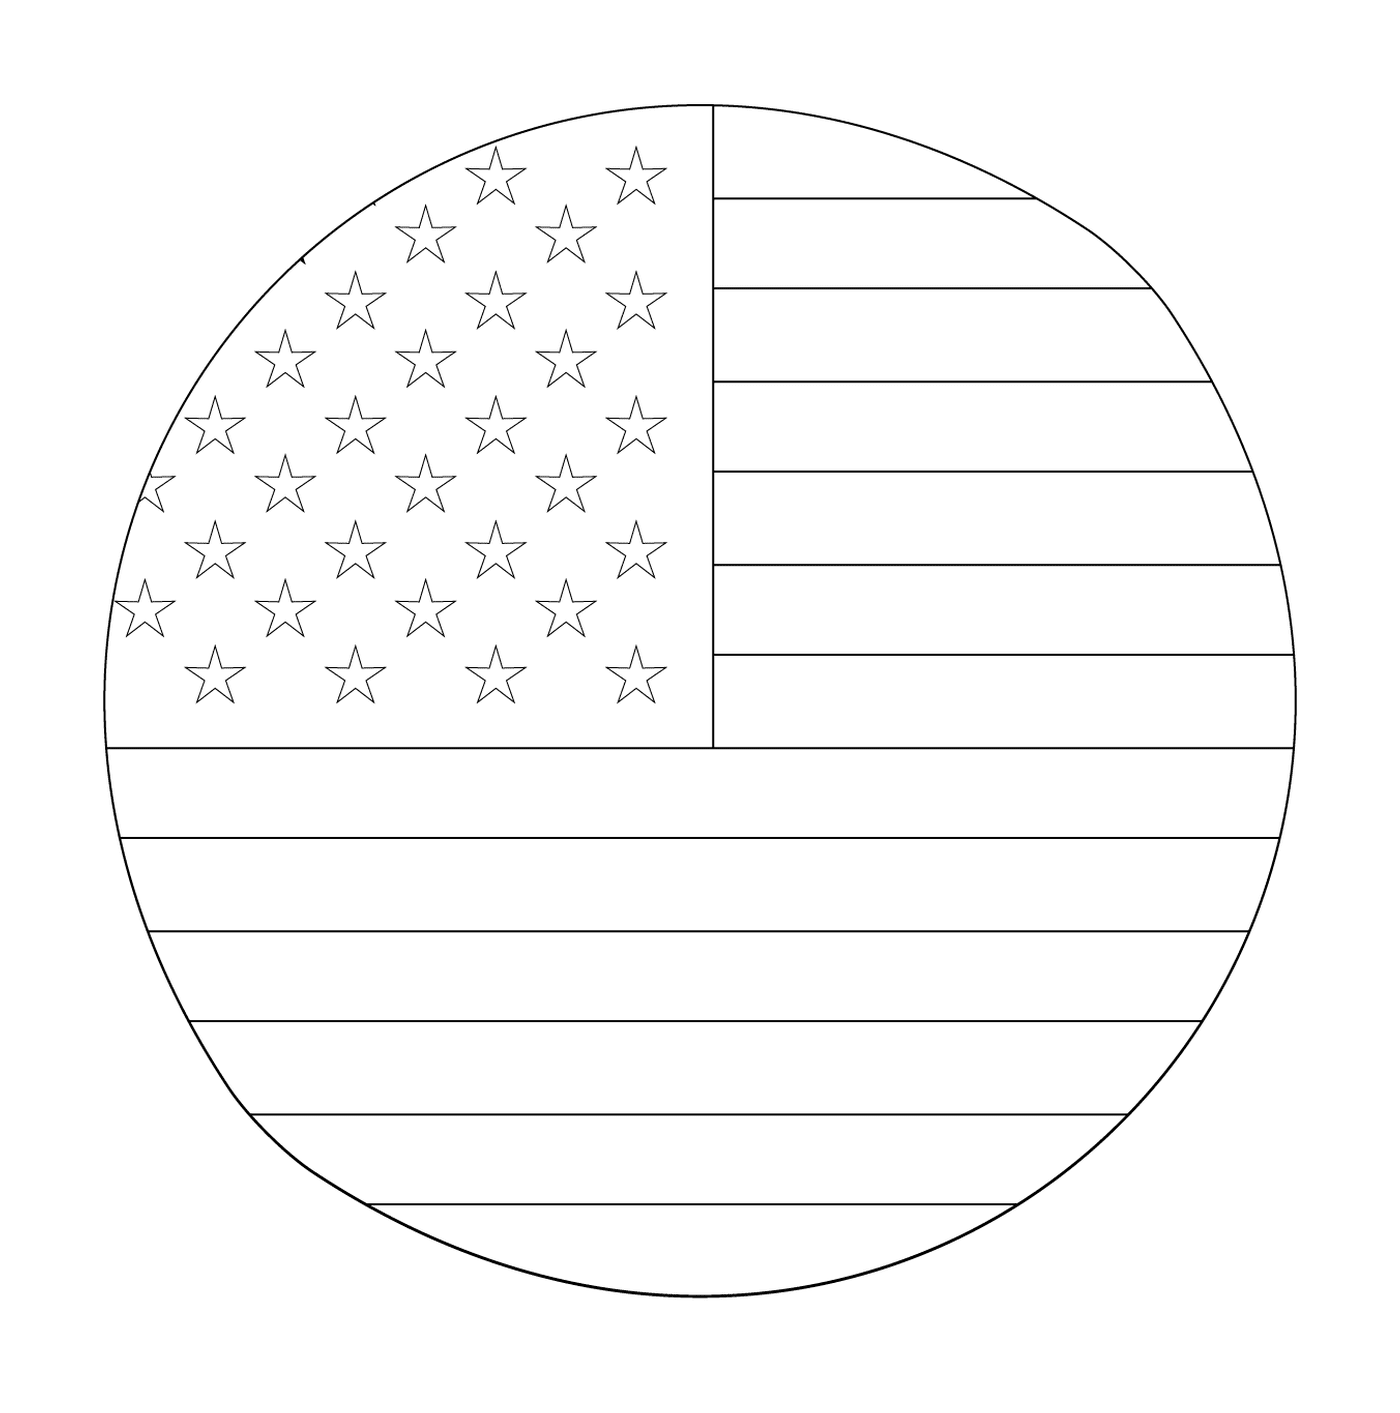  American flag in a circle 